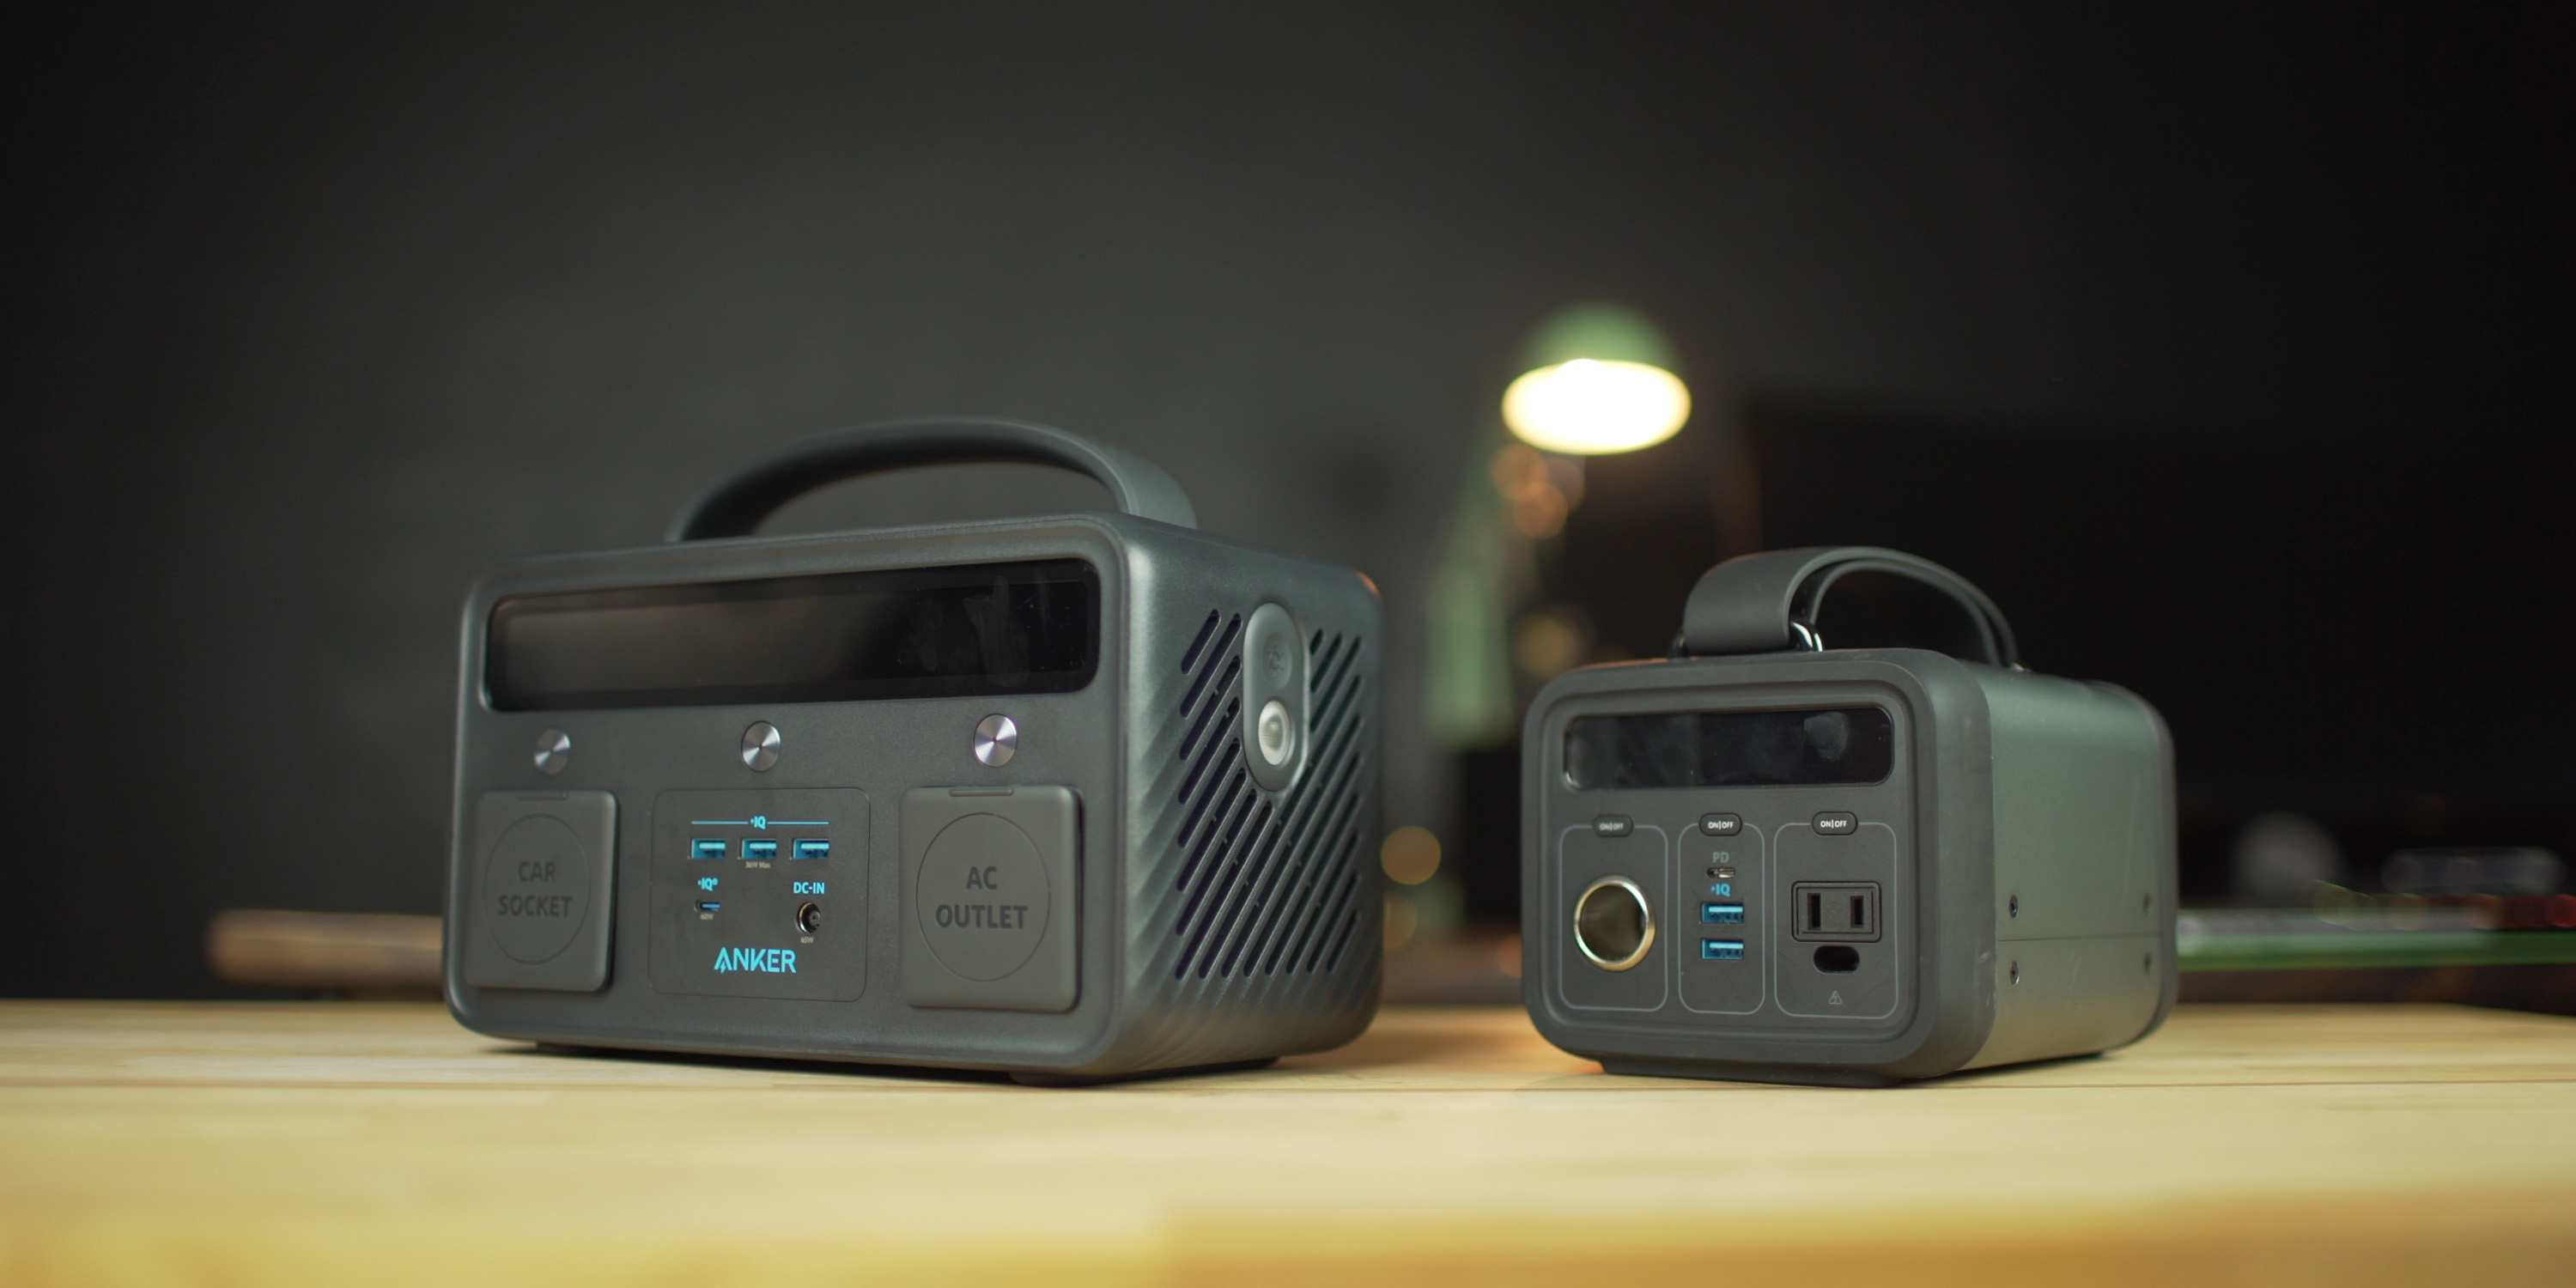 Anker Powerhouse II 400 Review: More capacity to power adventures